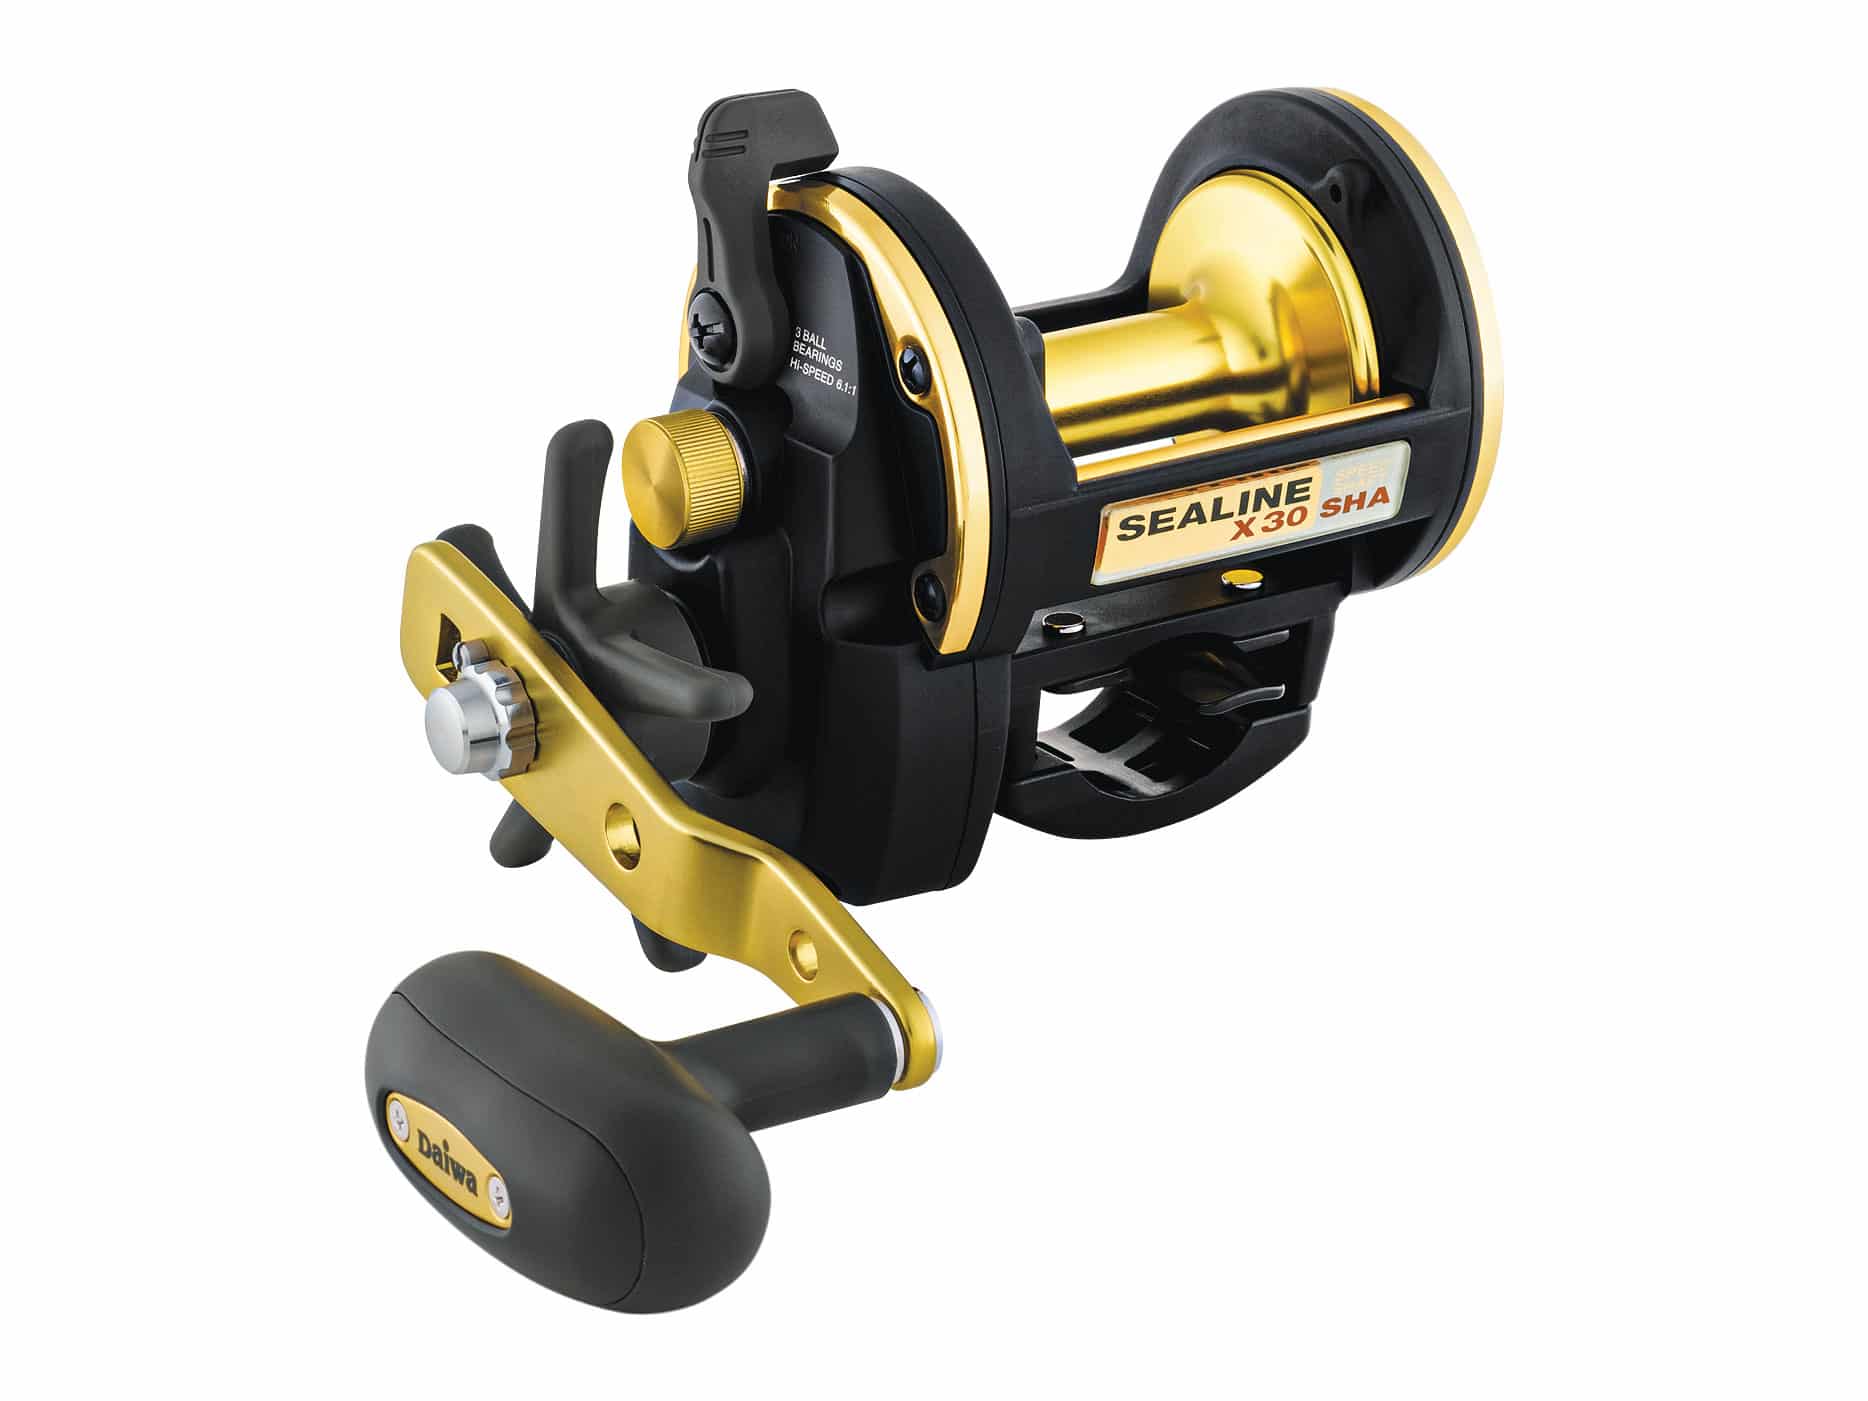 Conventional Surf-Casting Reels